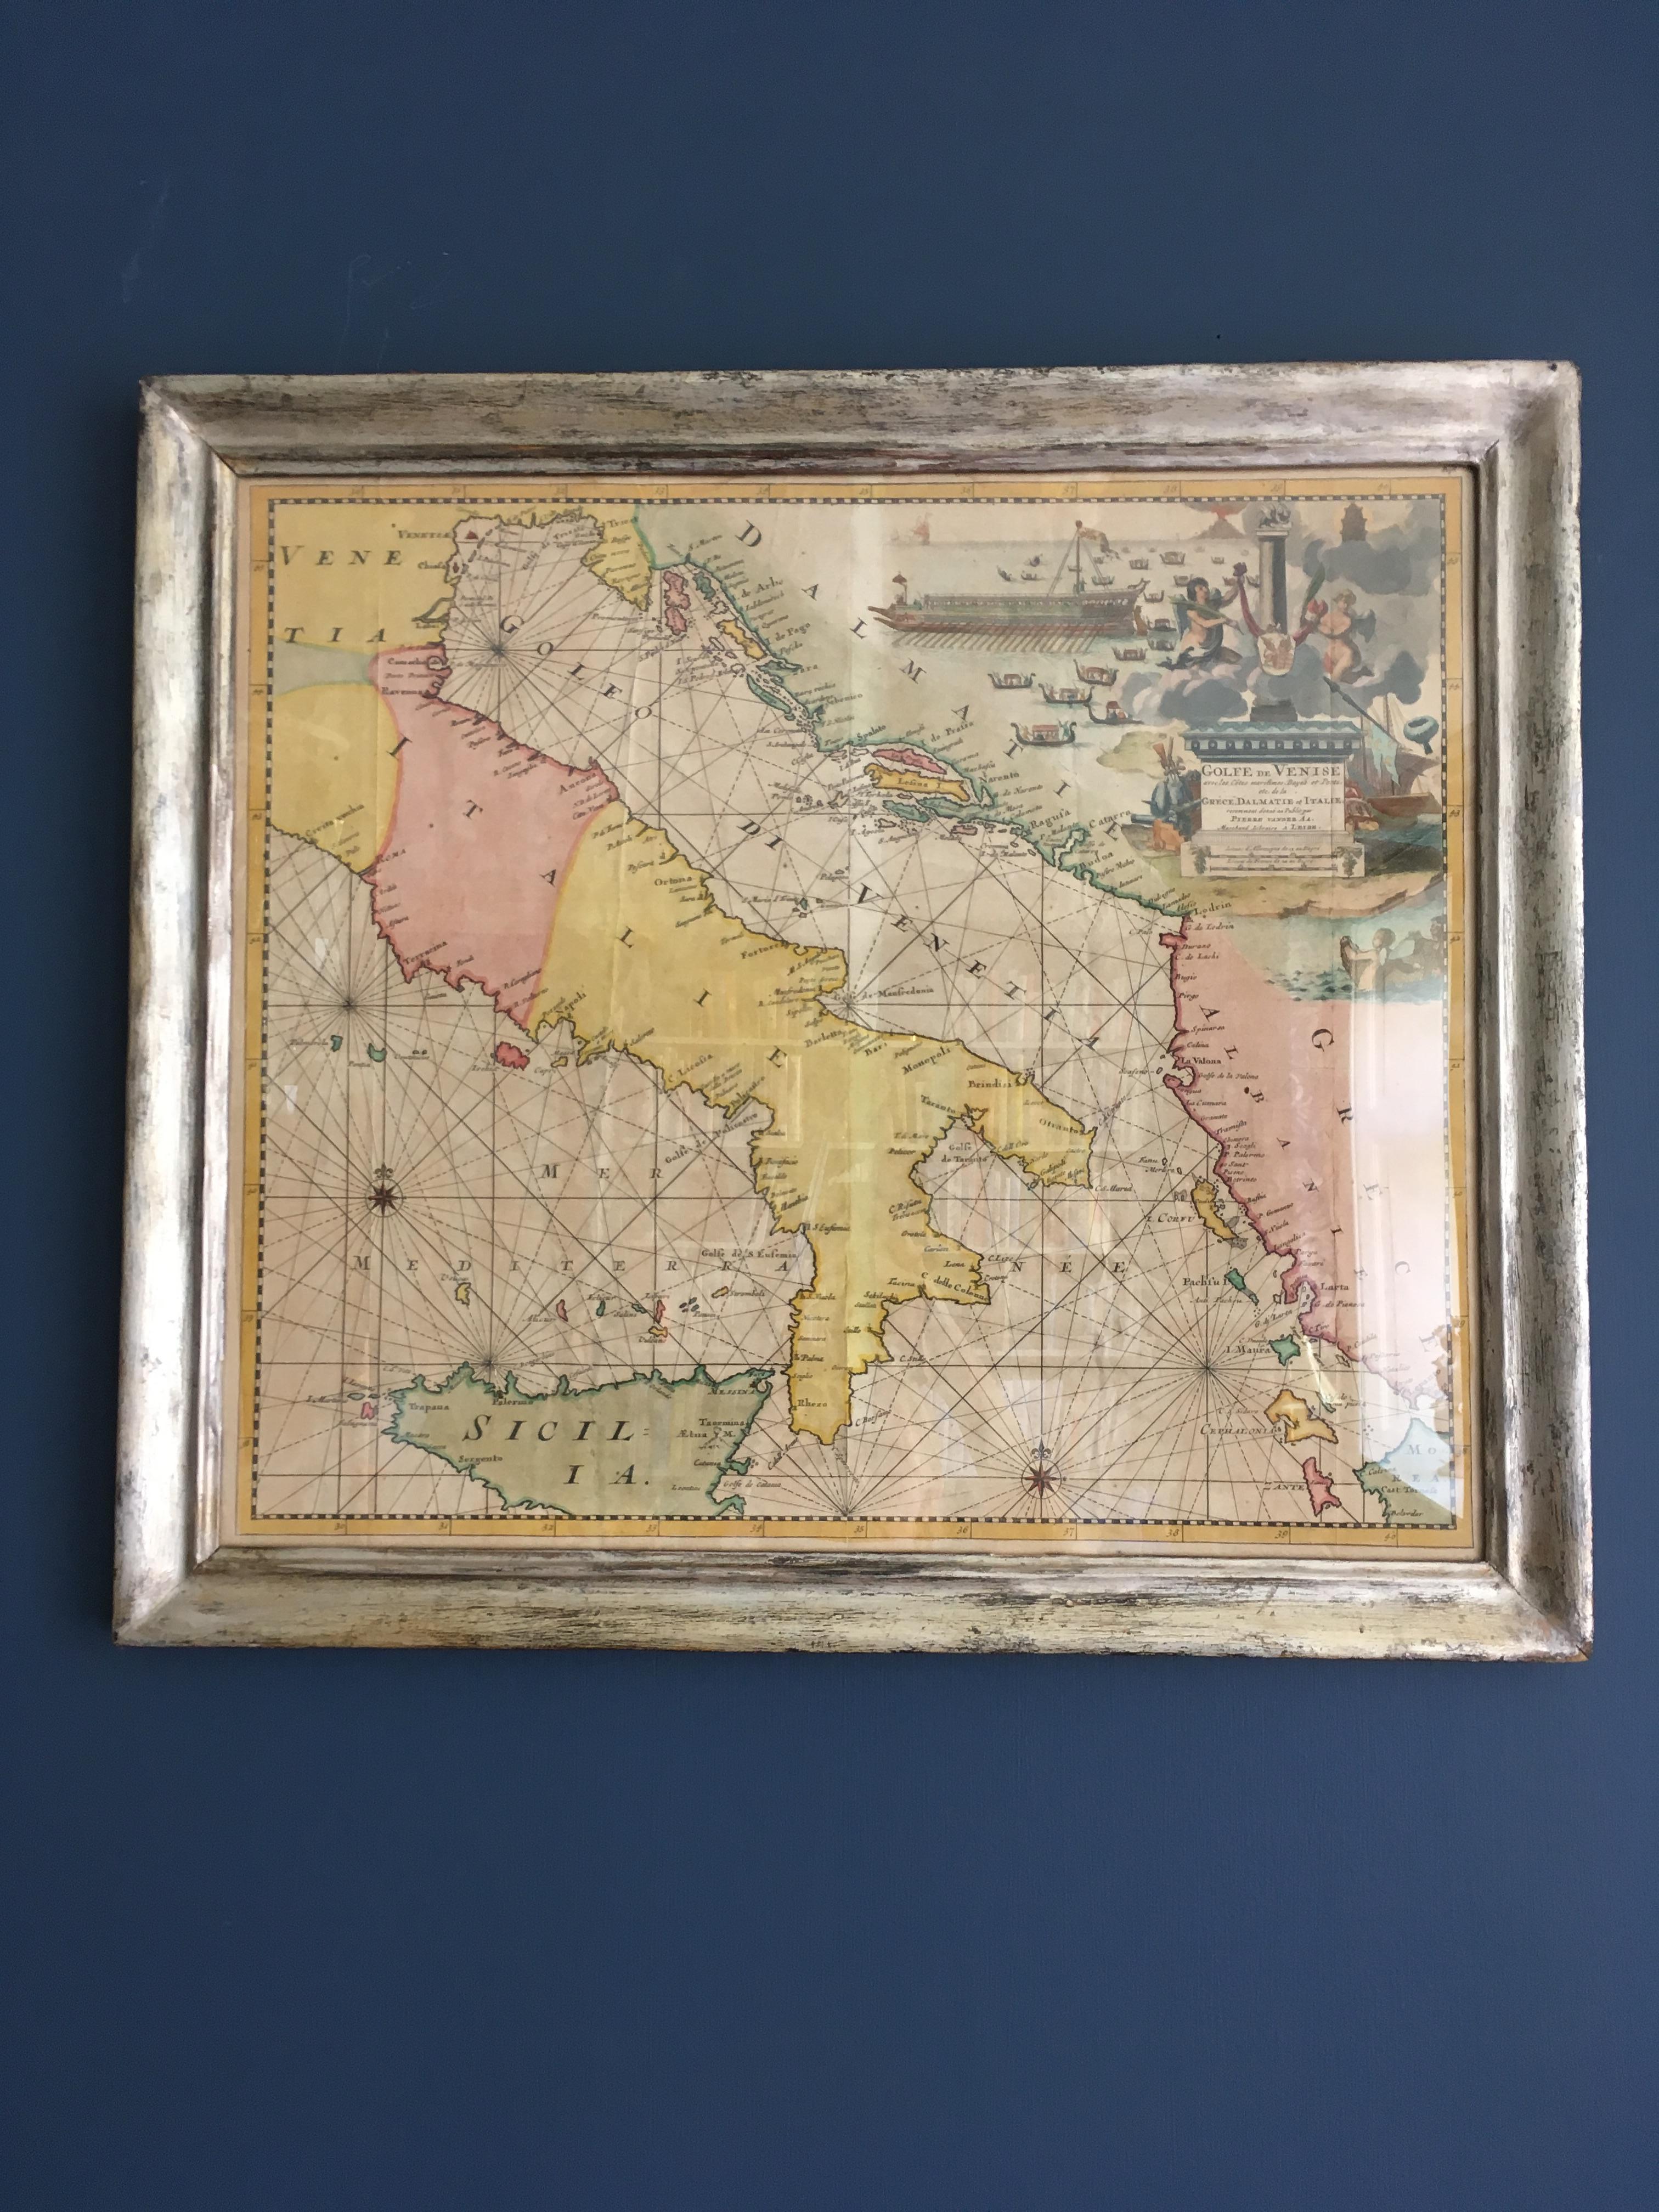 18th Century Antique Hand Colored Map of Venice Italy Late 18th-Century